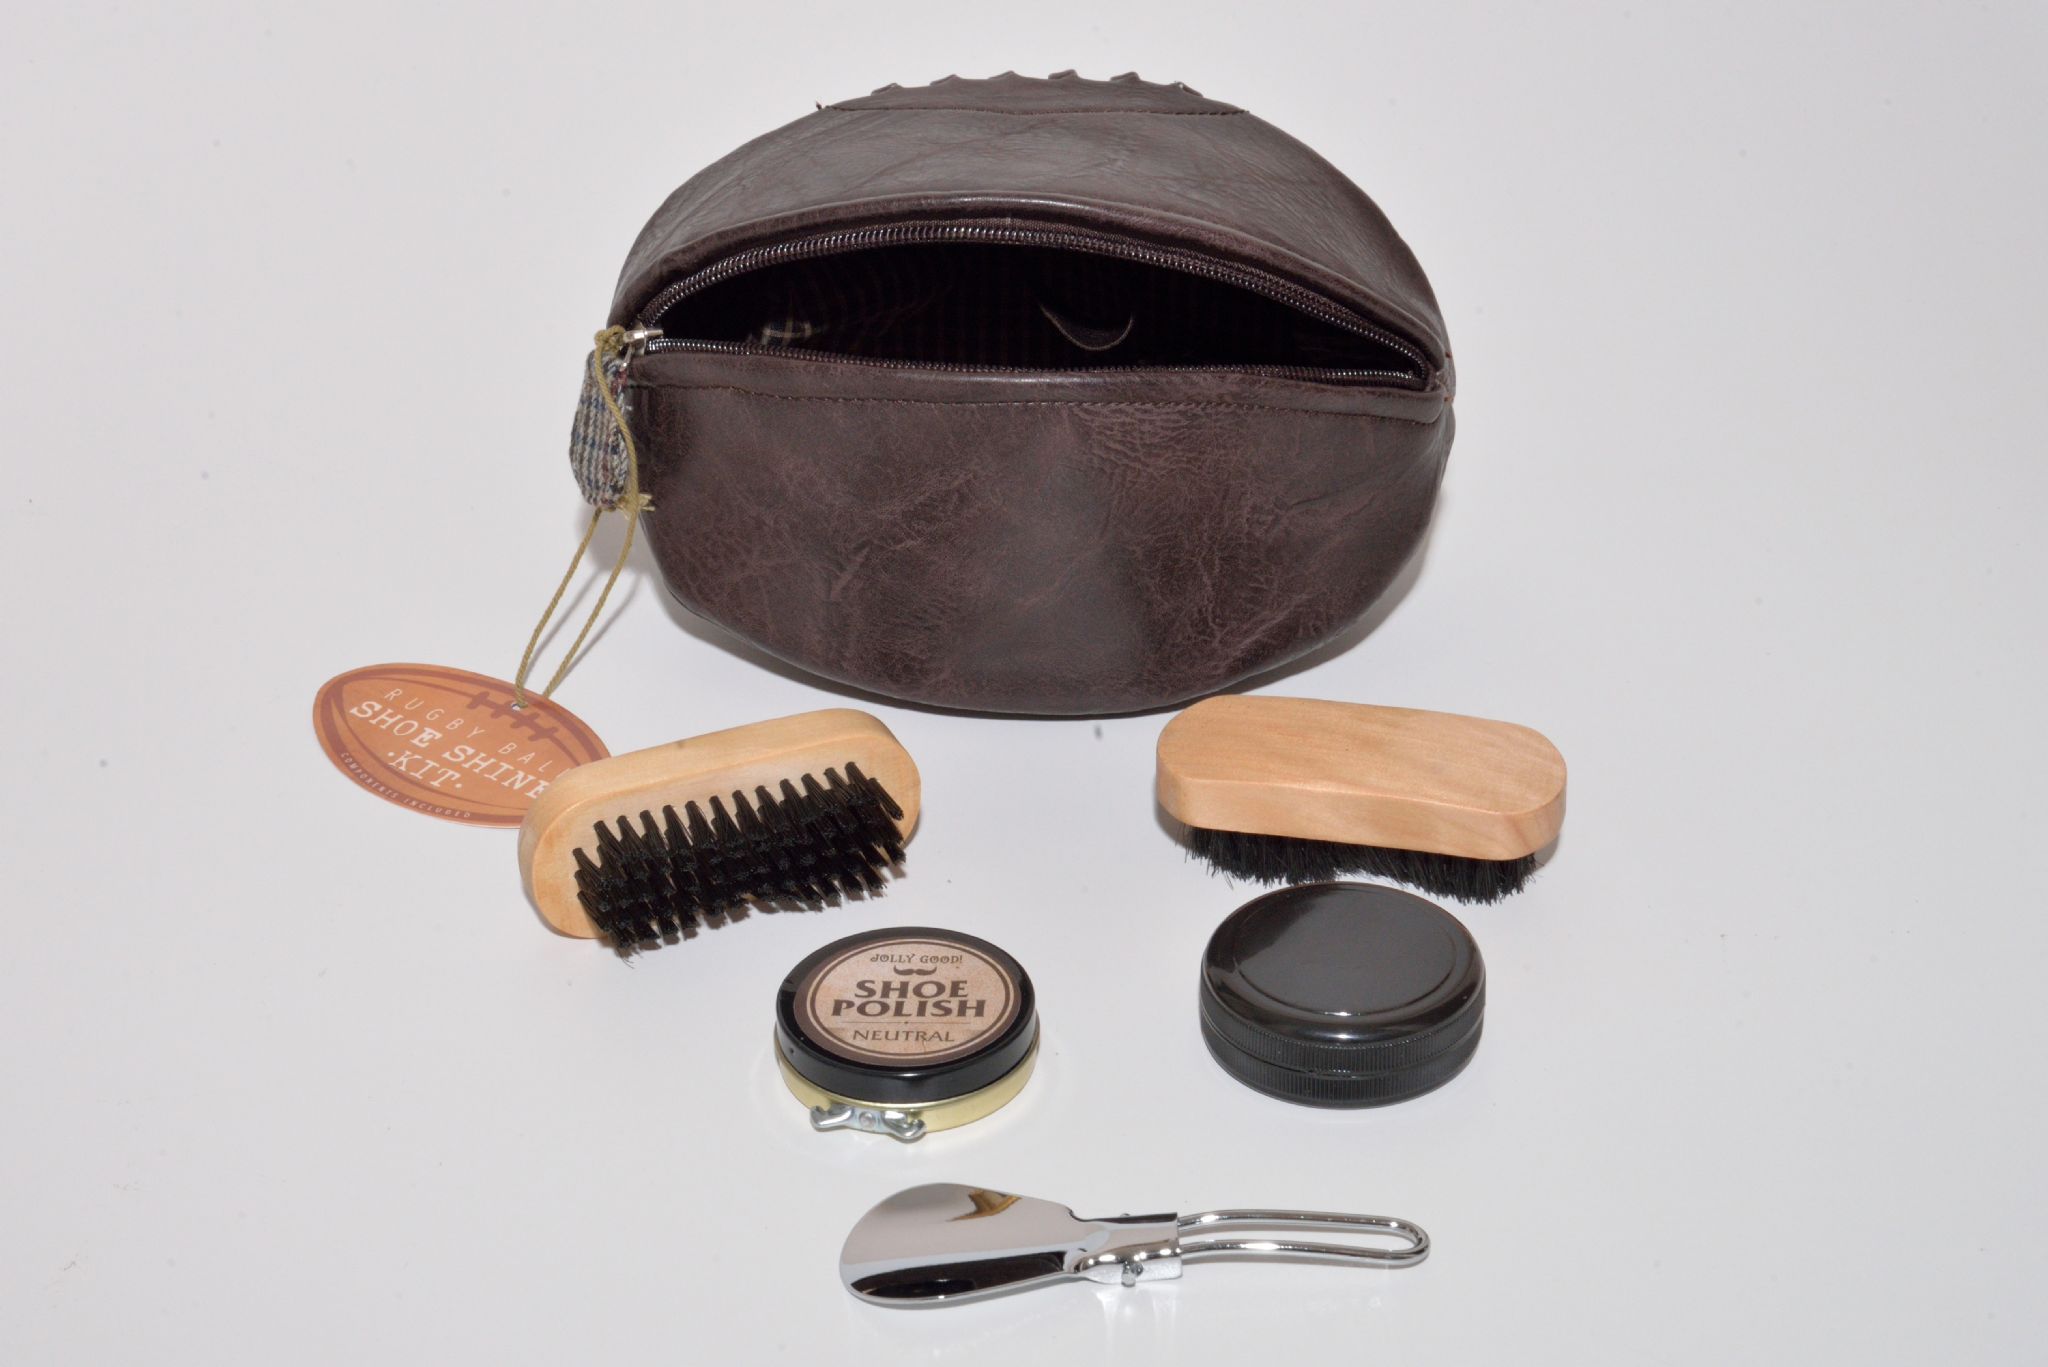 Portland Shoe Shine Kit in Rugby Ball